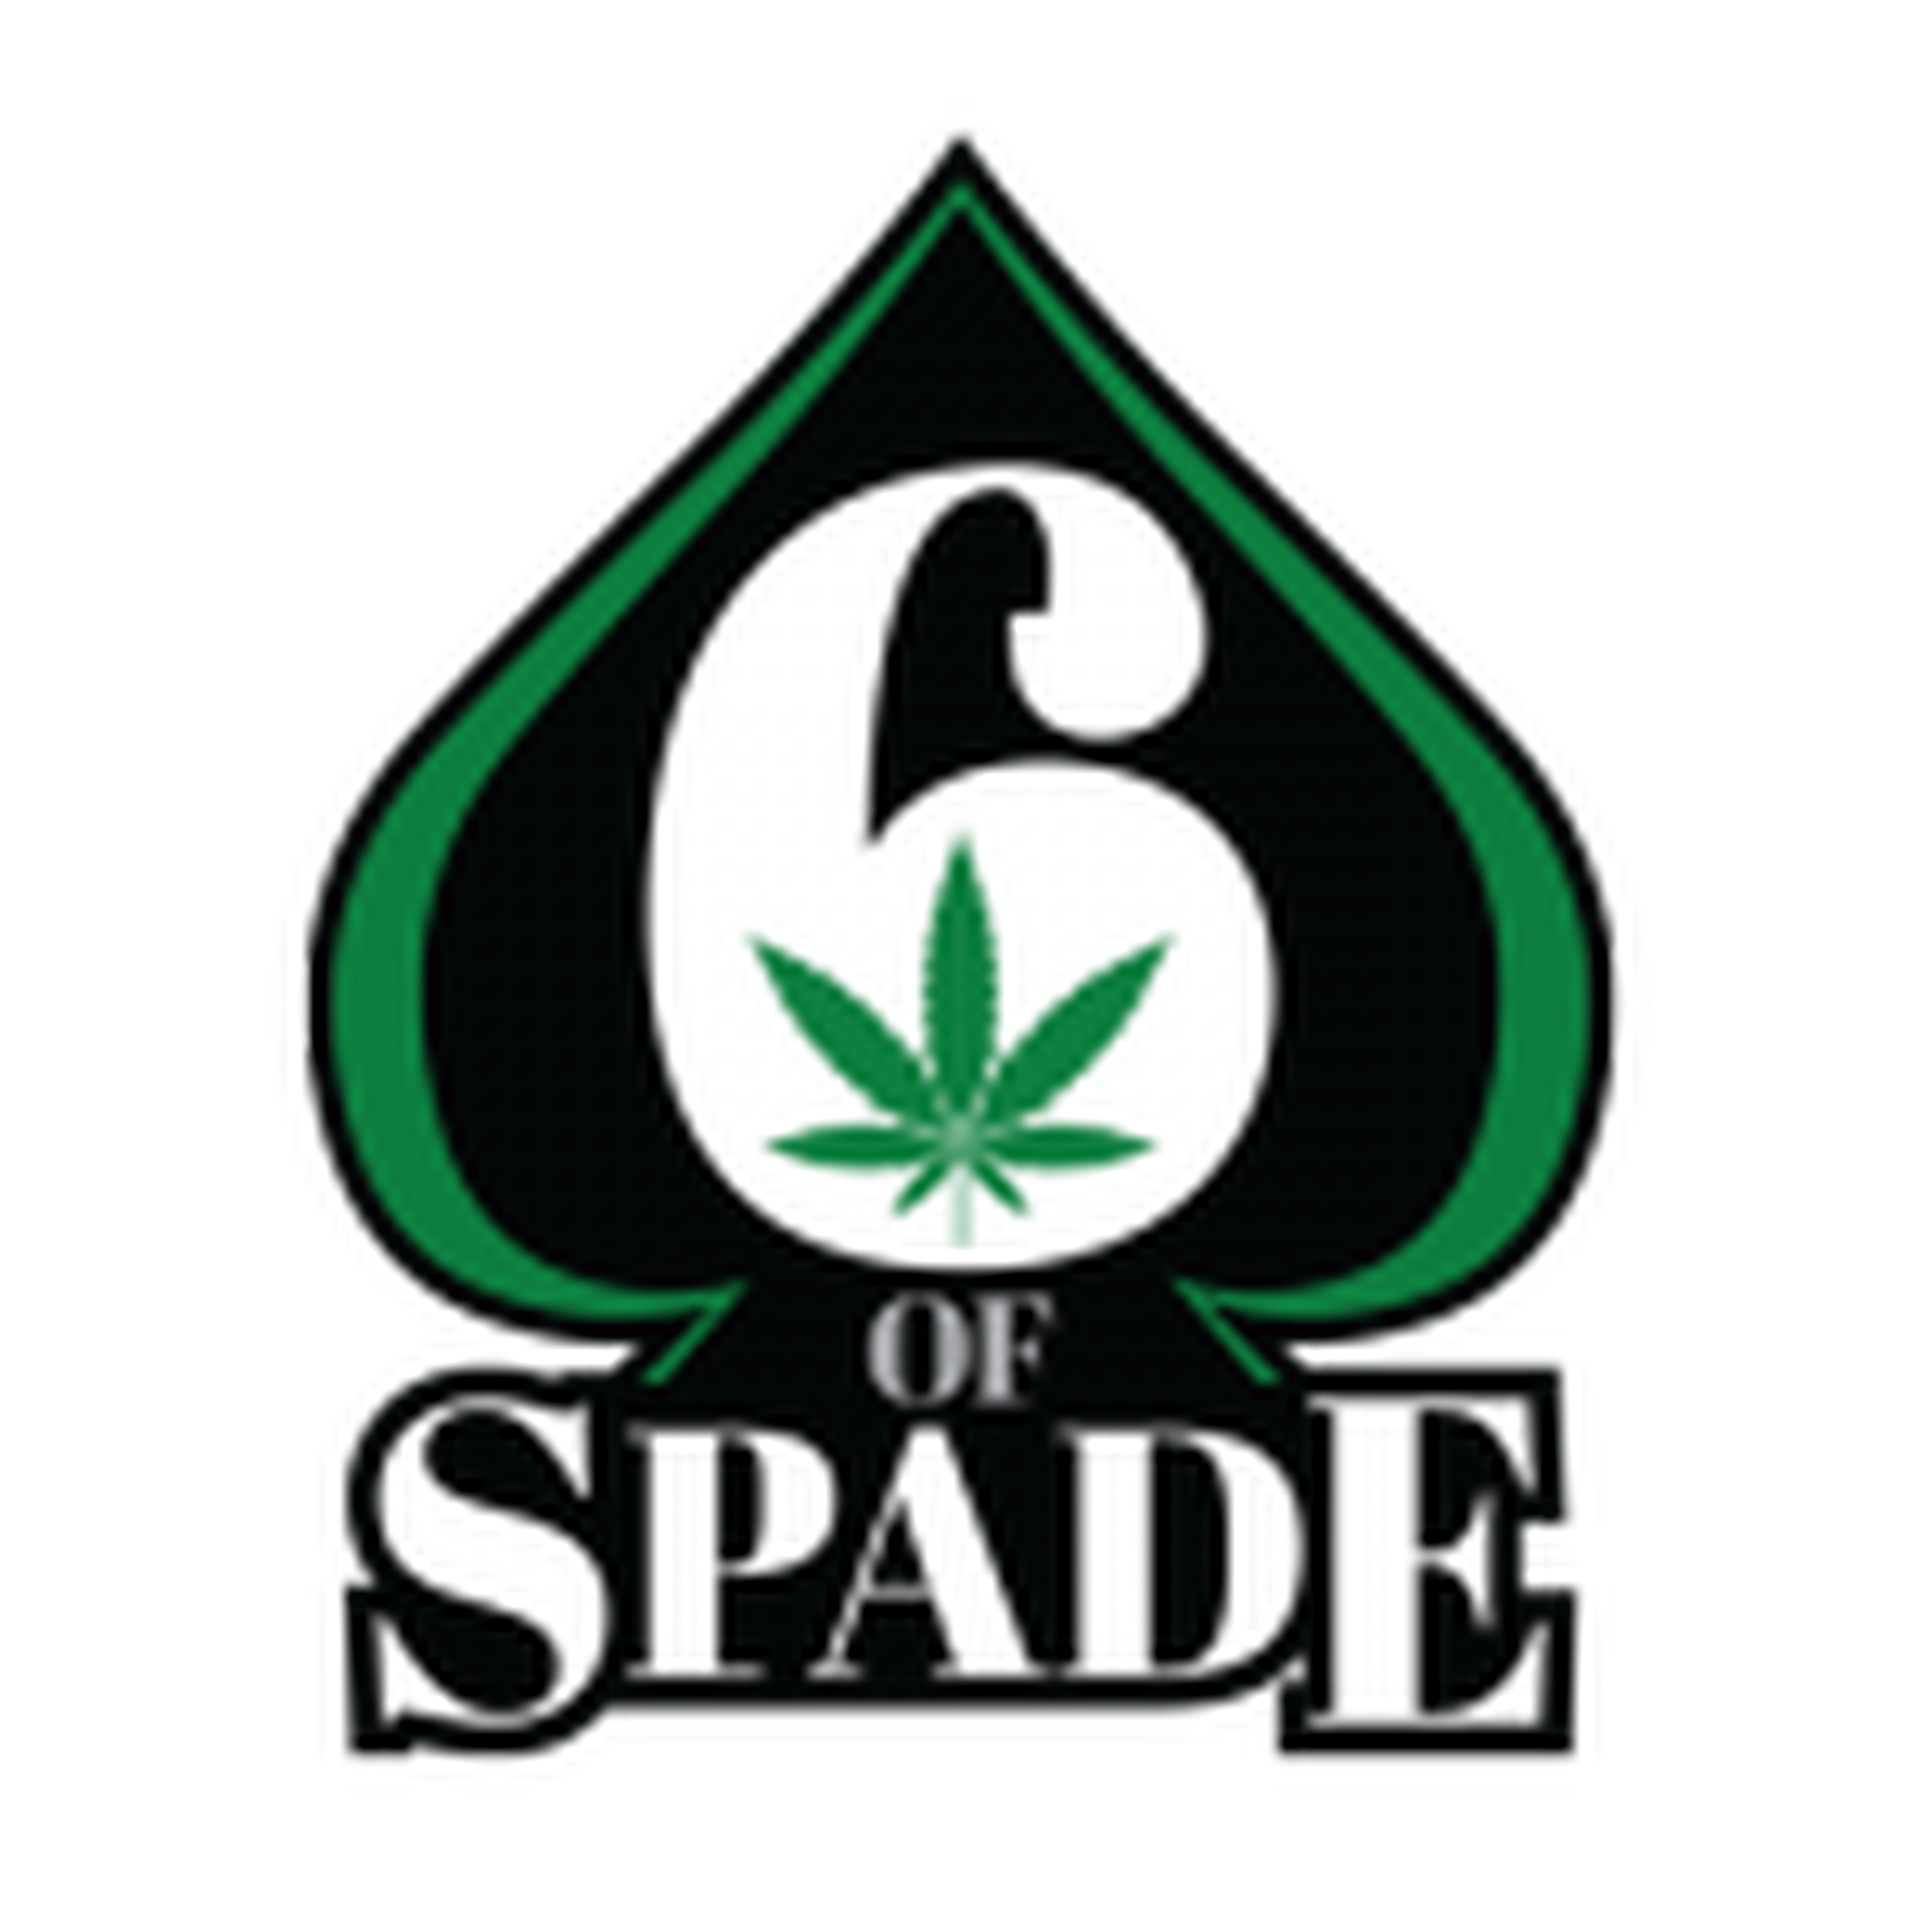 Cannabis Store 6 of Spade - Toronto - Best Prices In Town!  - 0